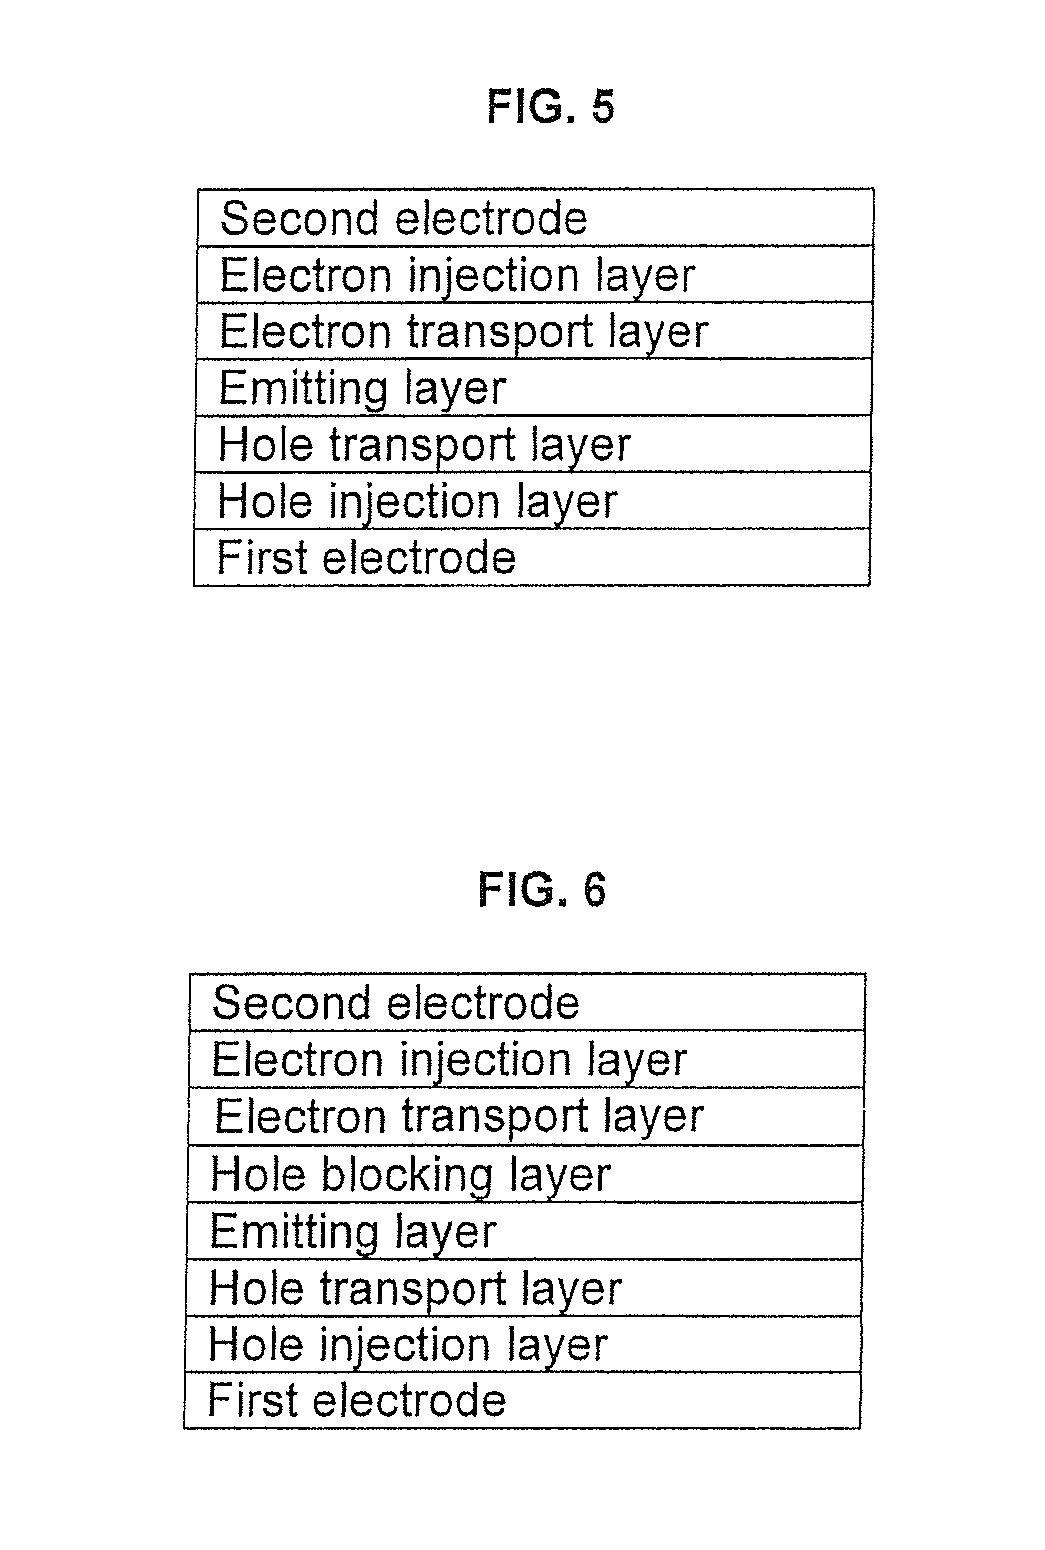 Fluorine-containing compound and organic light-emitting device employing the same